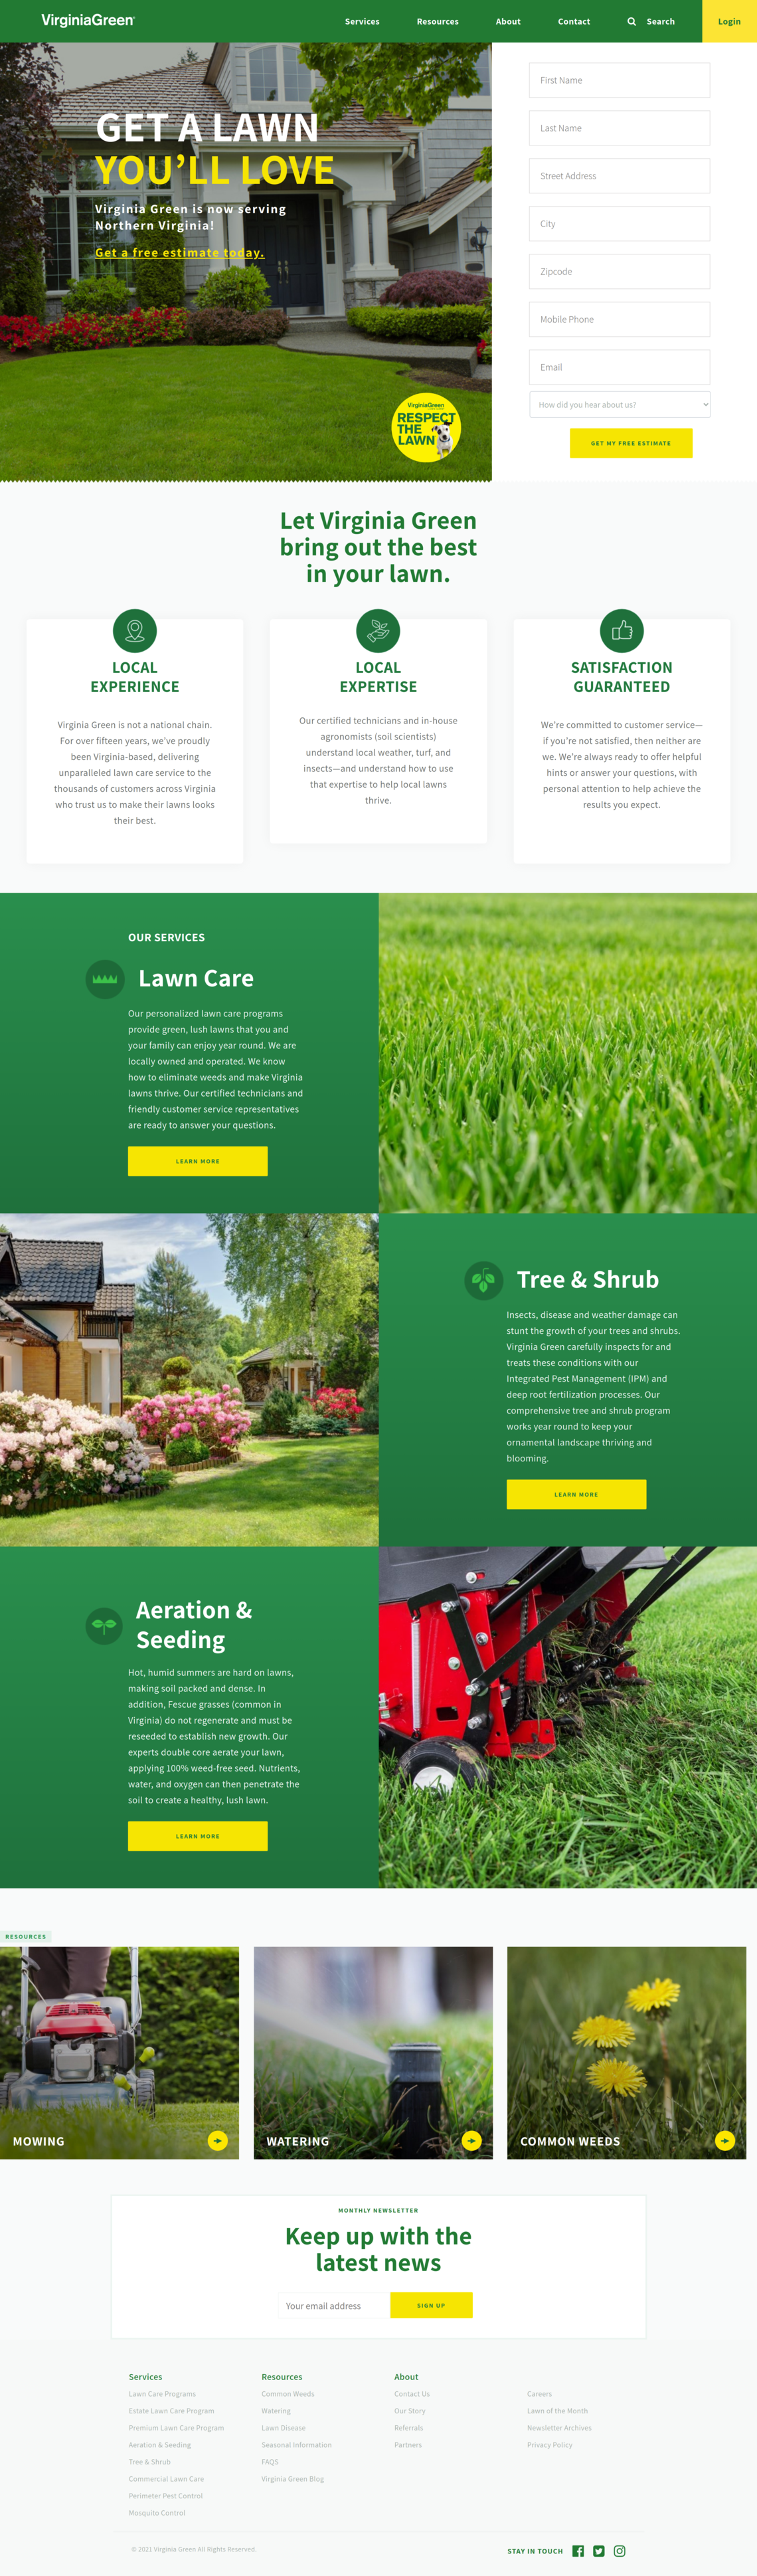 Landing Page Template for Lawn Care - virginiagreen.com